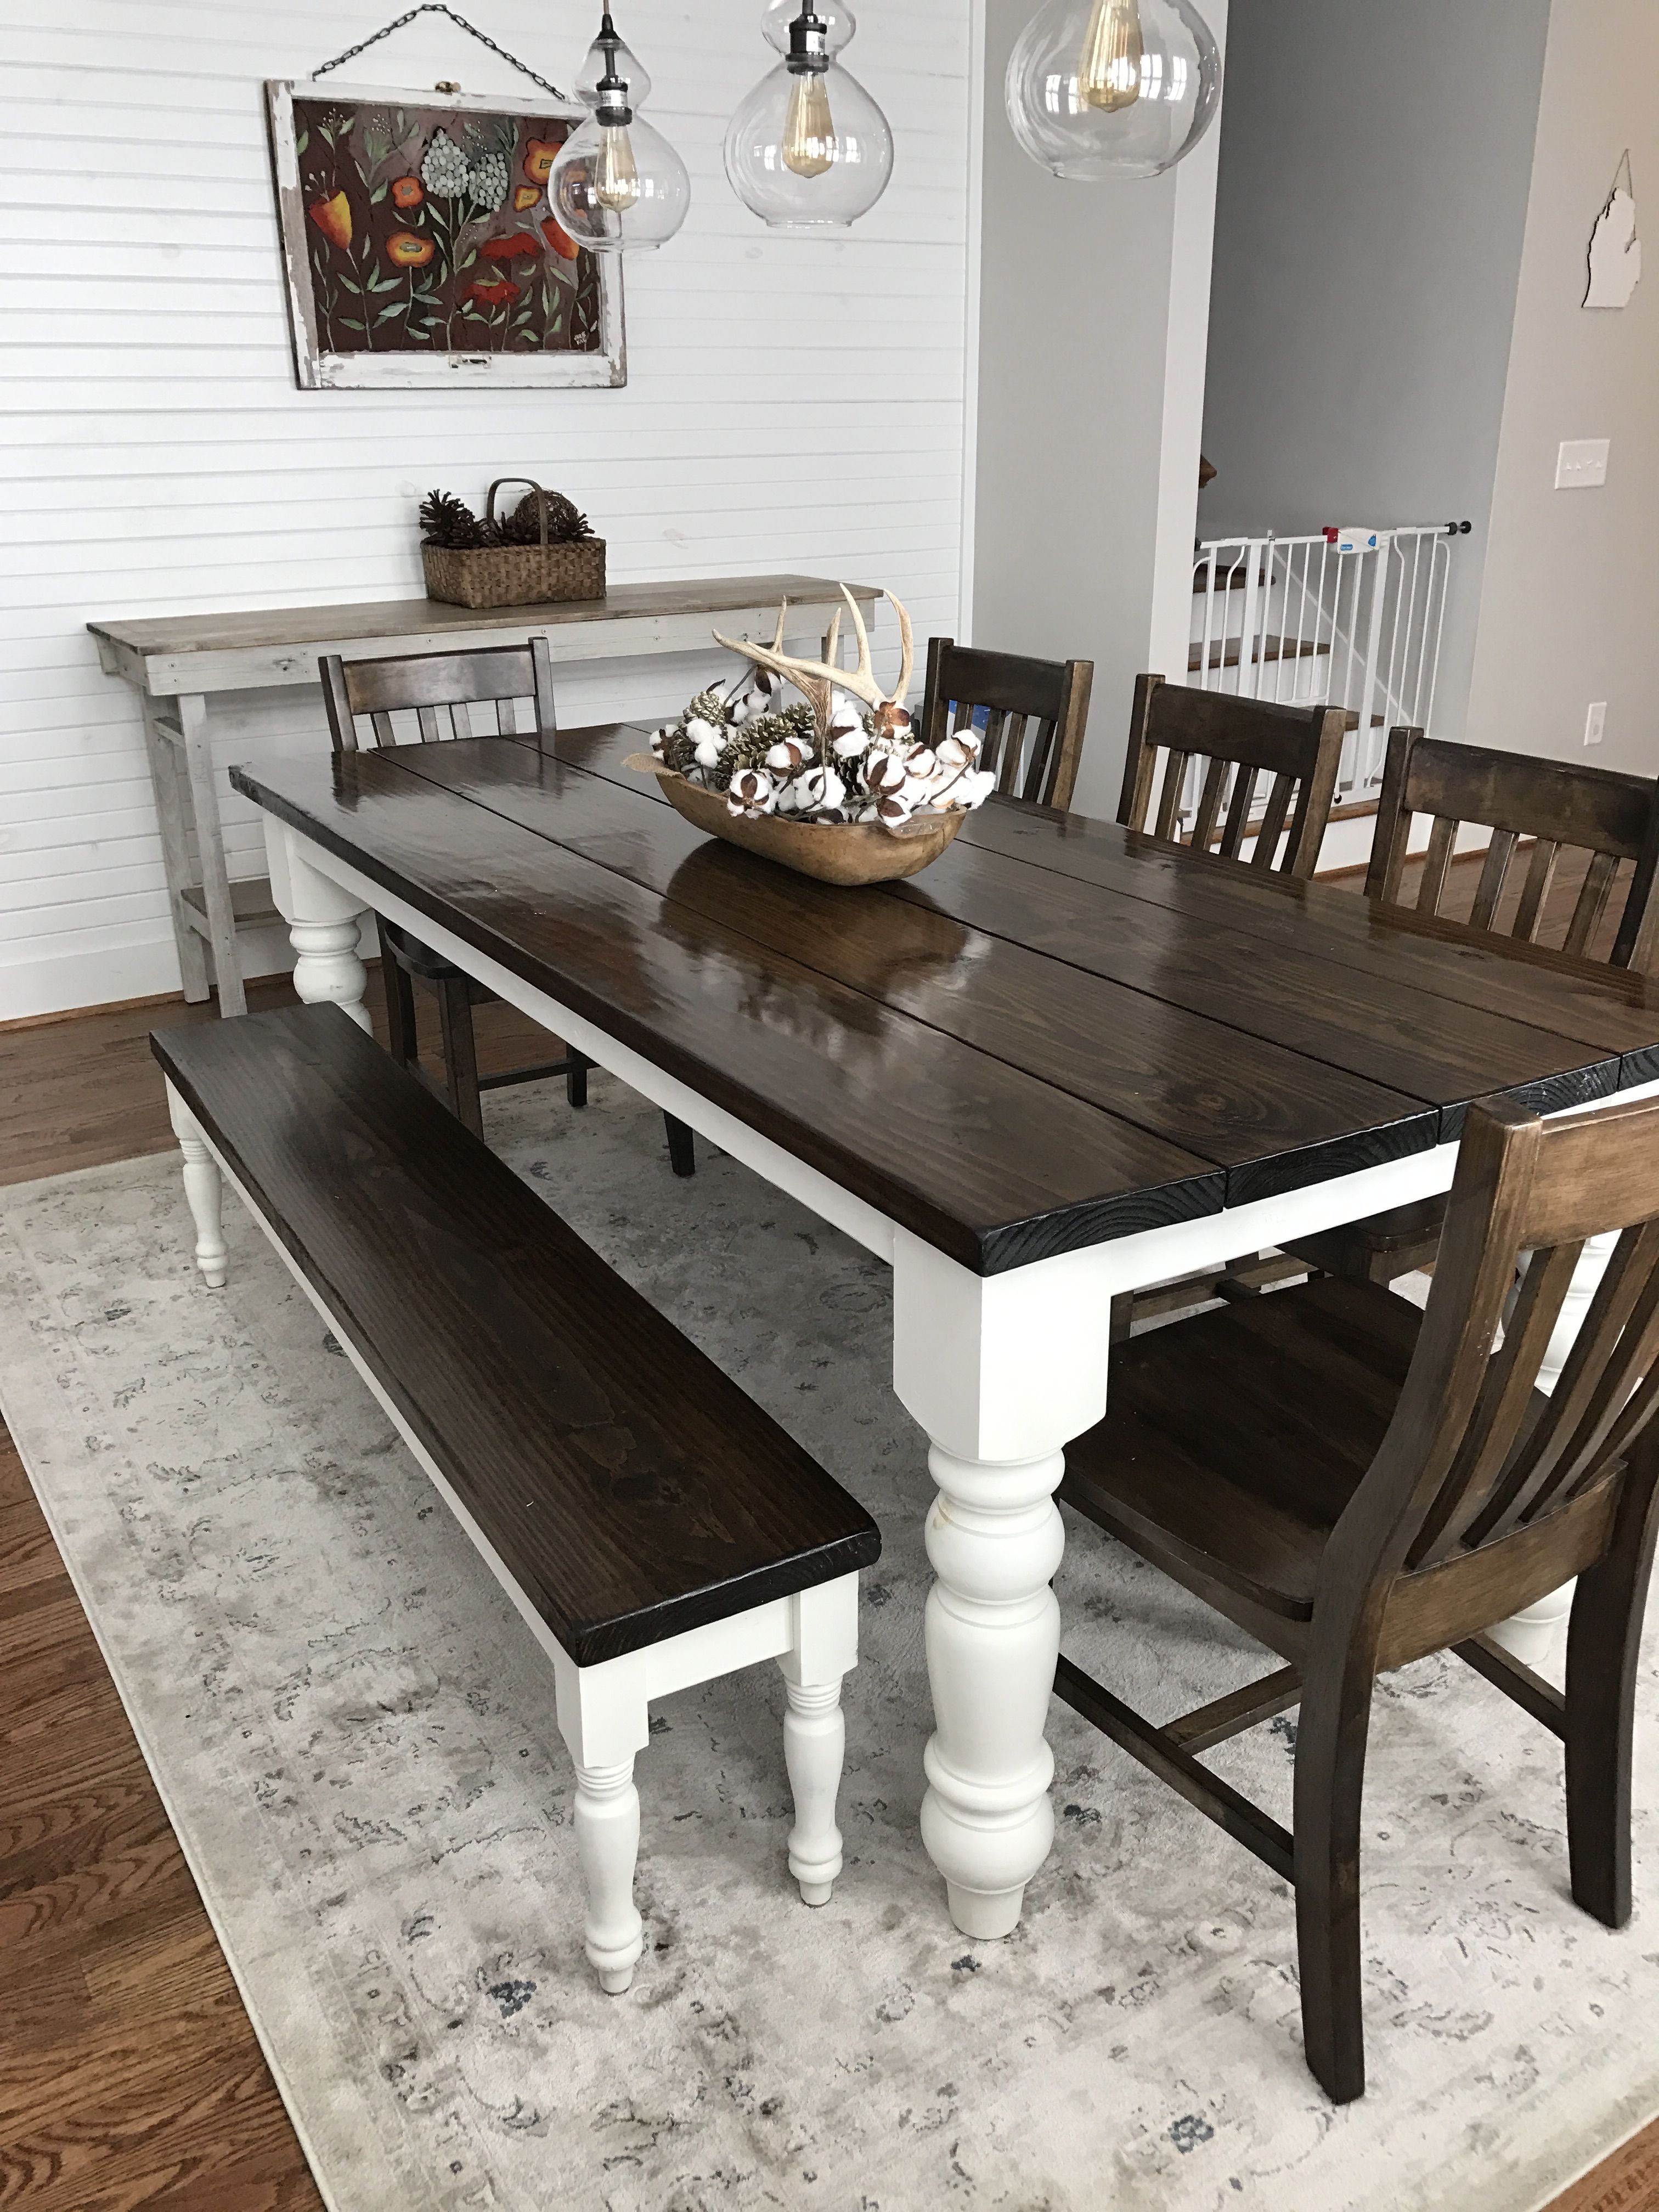 Custom built, solid wood Modern Farmhouse Dining Furniture. 7 L x 37″ W x 30″ H Baluster Table with a traditional tabletop stained